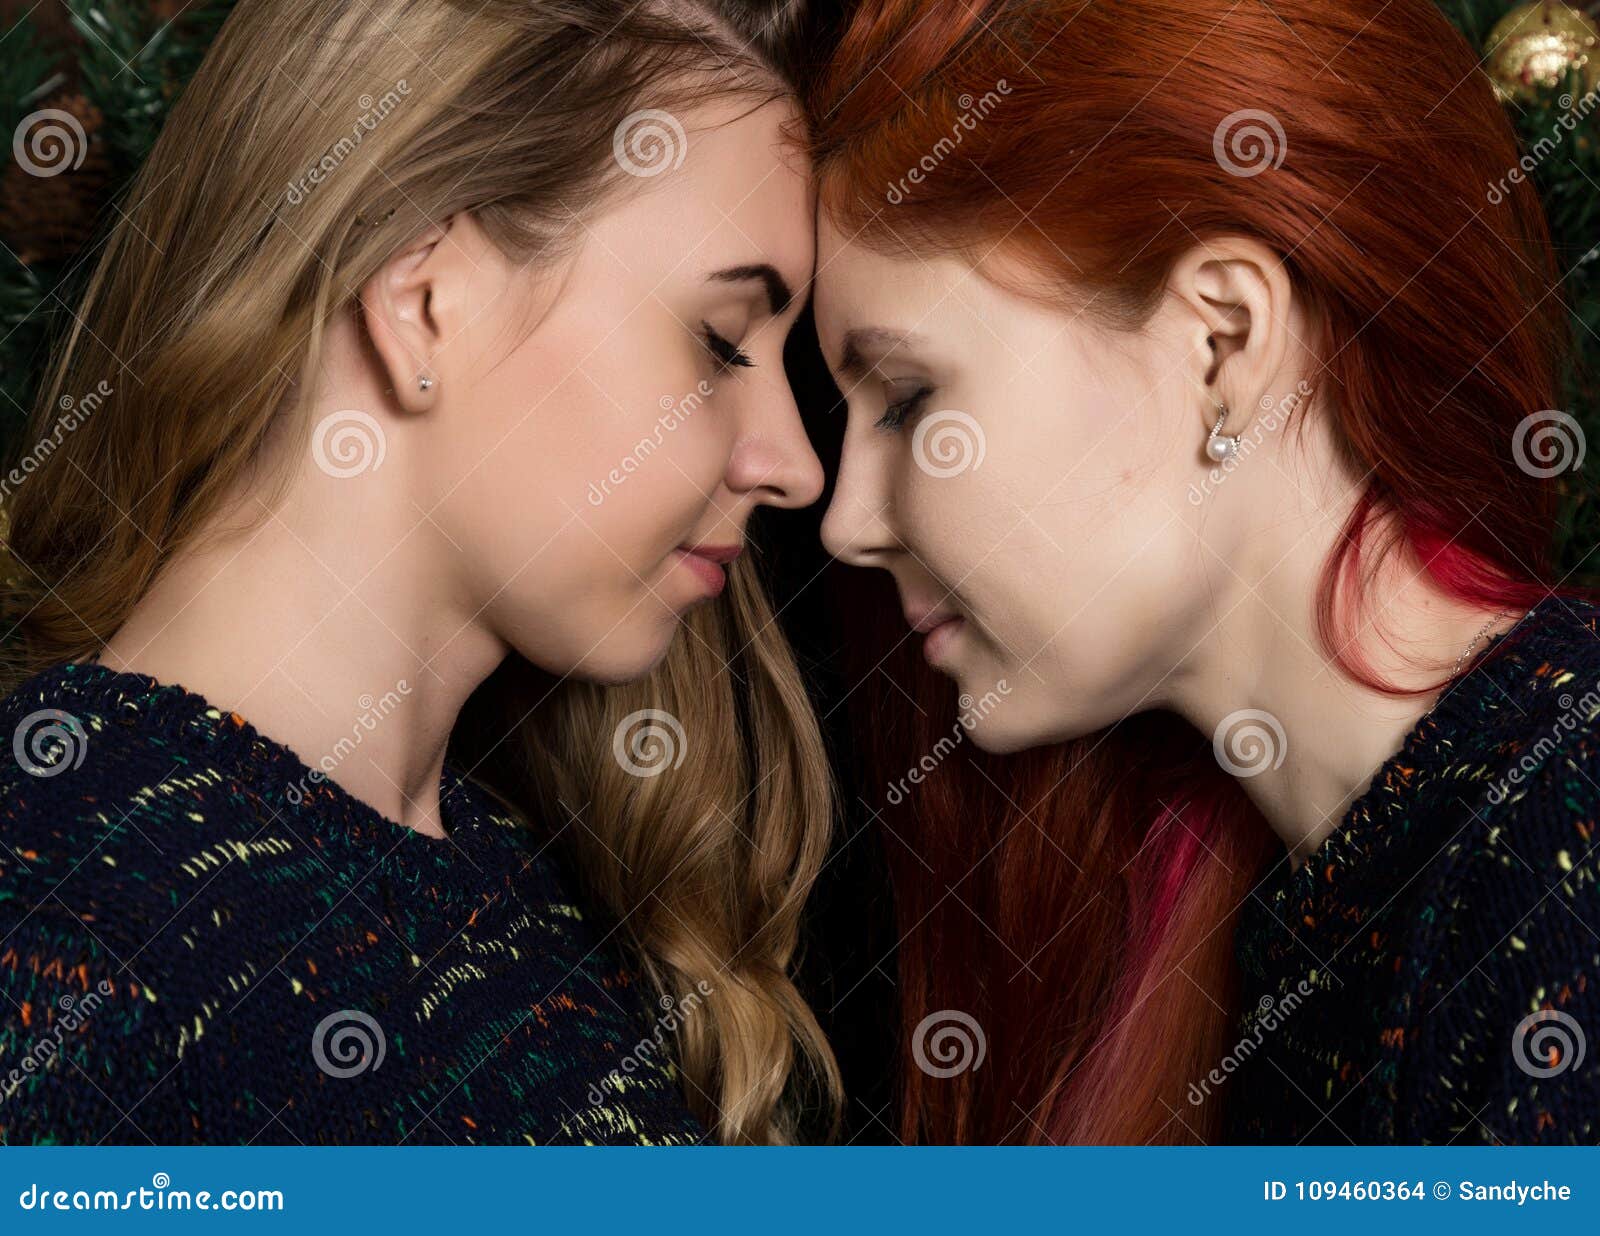 Girlfriends Spend Time Together Two Pretty Lesbians Girlfriends Kissing And Hugging In A Cozy